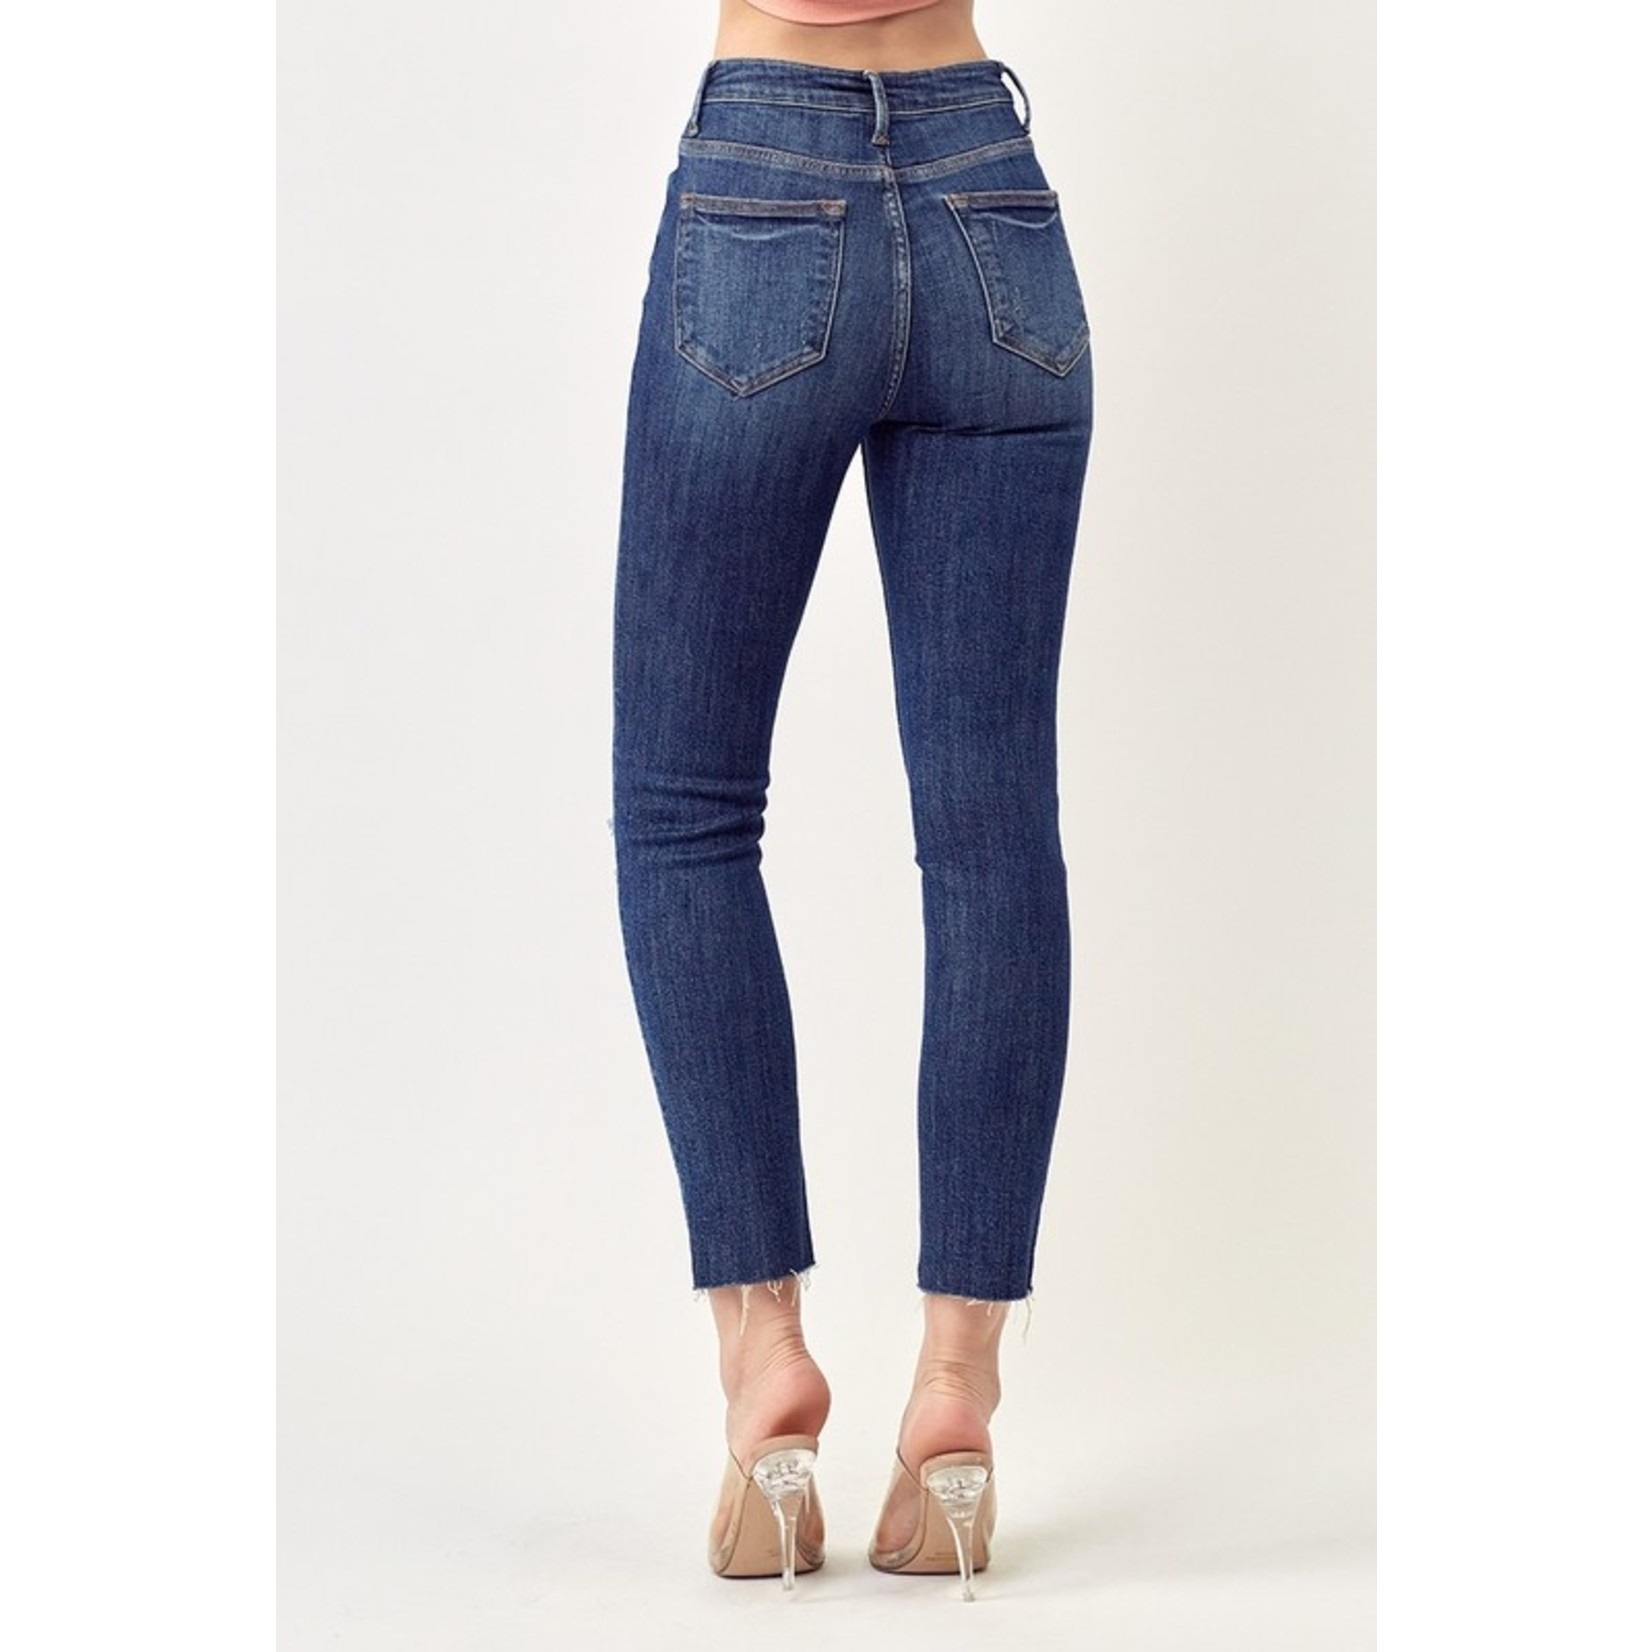 The Freedom Distressed Skinny Jeans